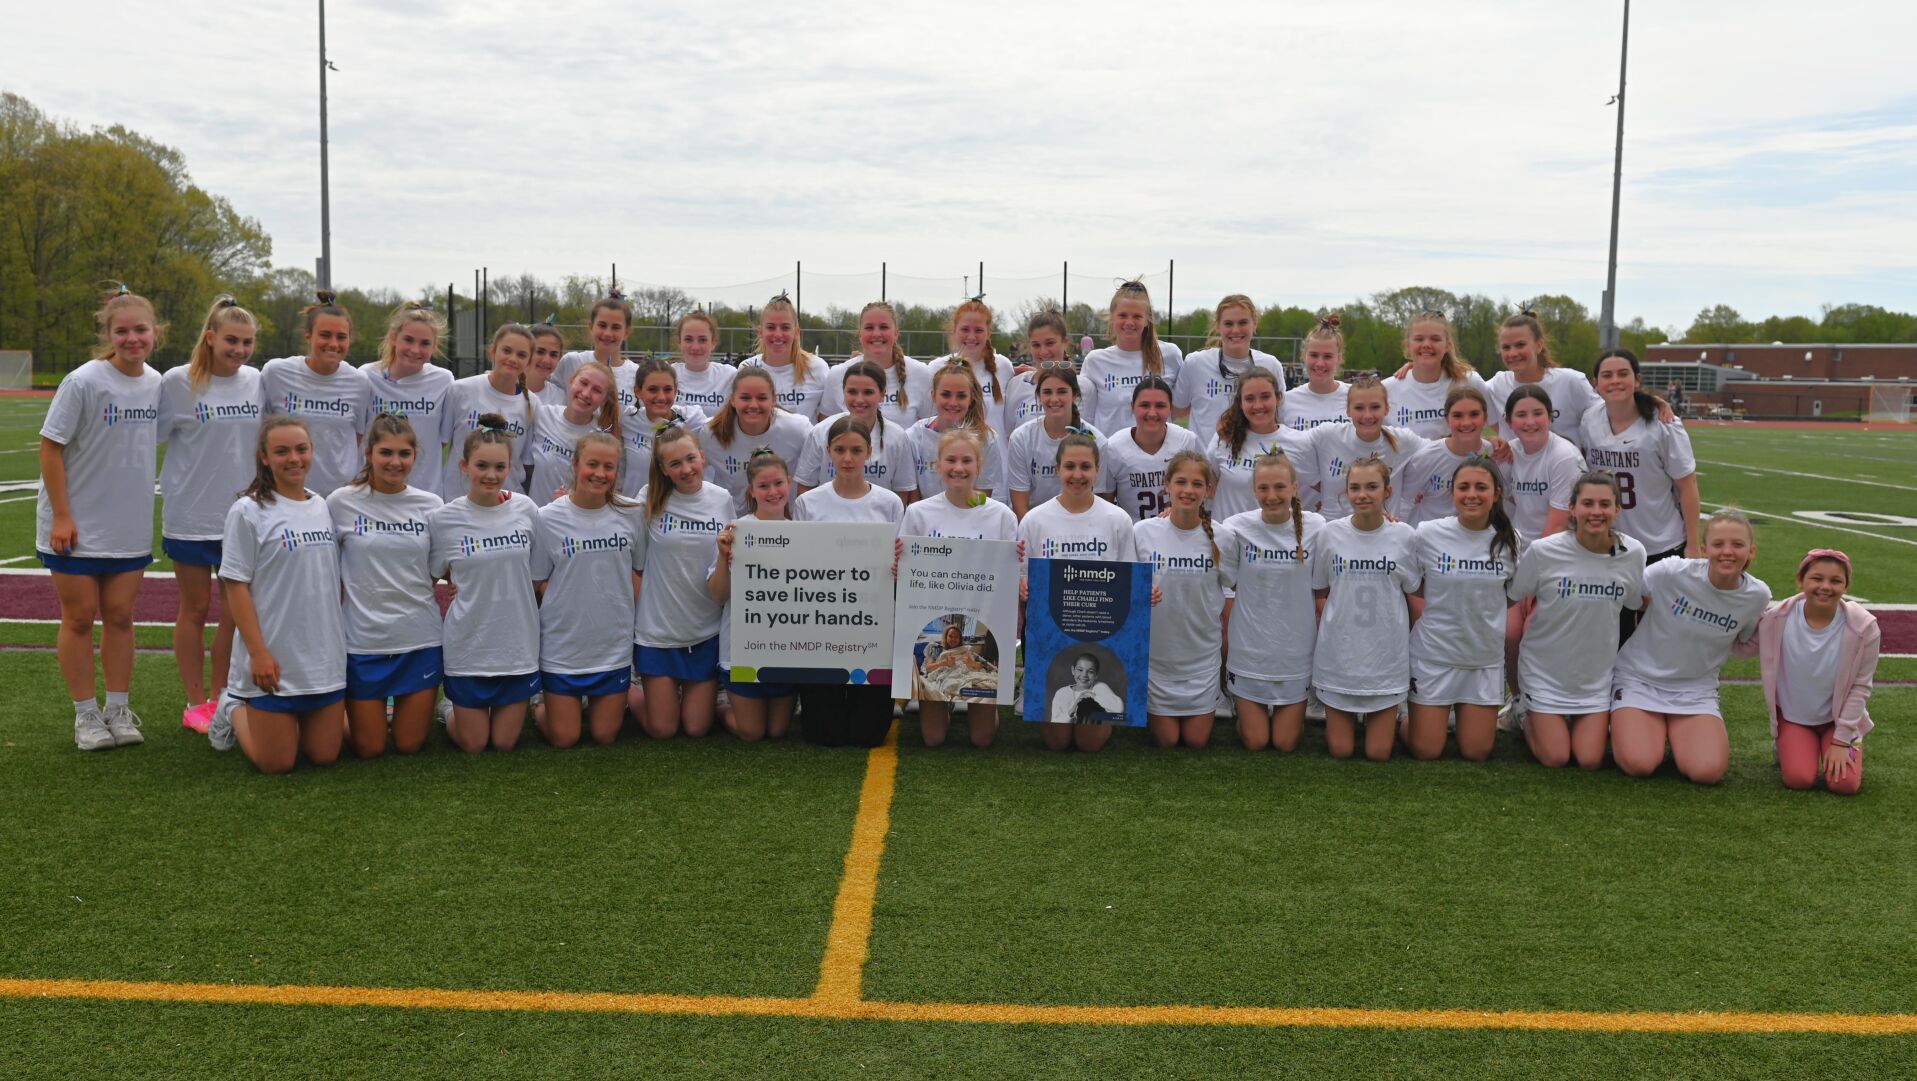 Burnt Hills, Saratoga Springs girls’ lacrosse teams come together to support National Marrow Donor Program